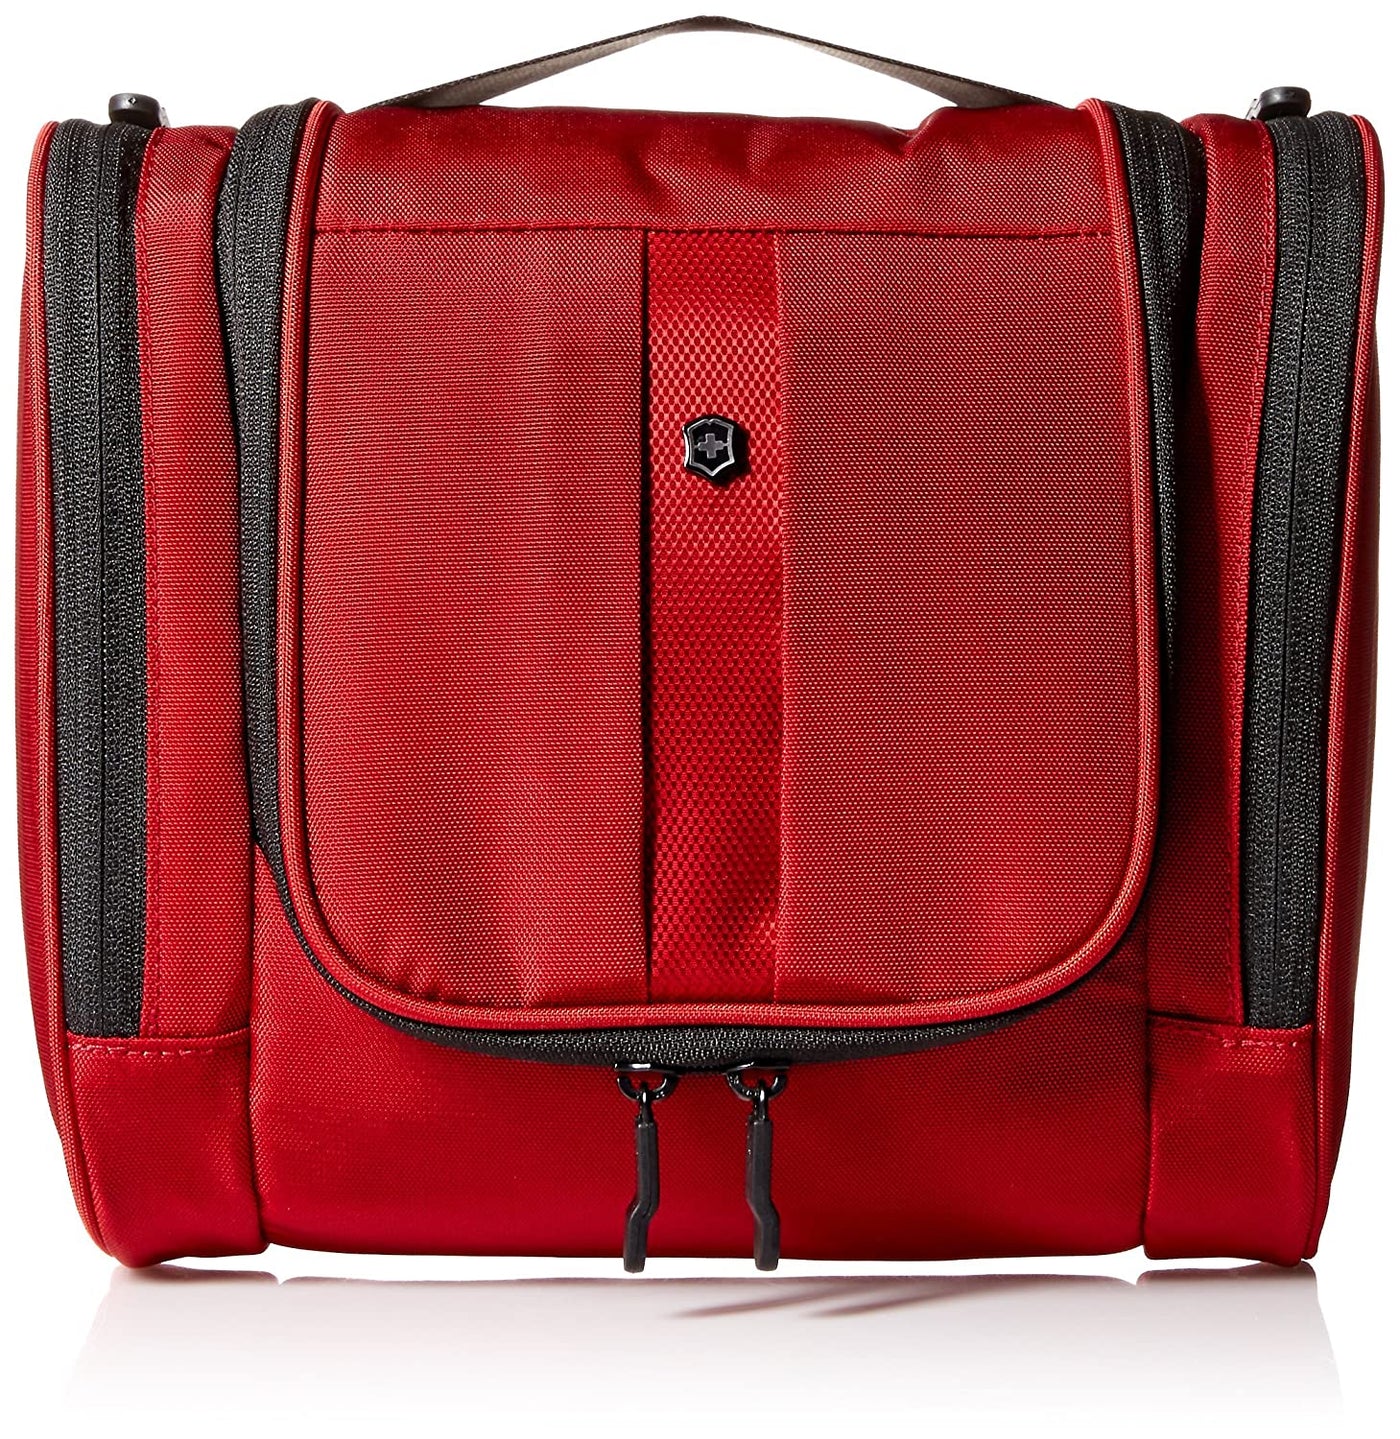 Shop The Latest Collection Of Victorinox Hanging Toiletry Kit-31173003 In Lebanon